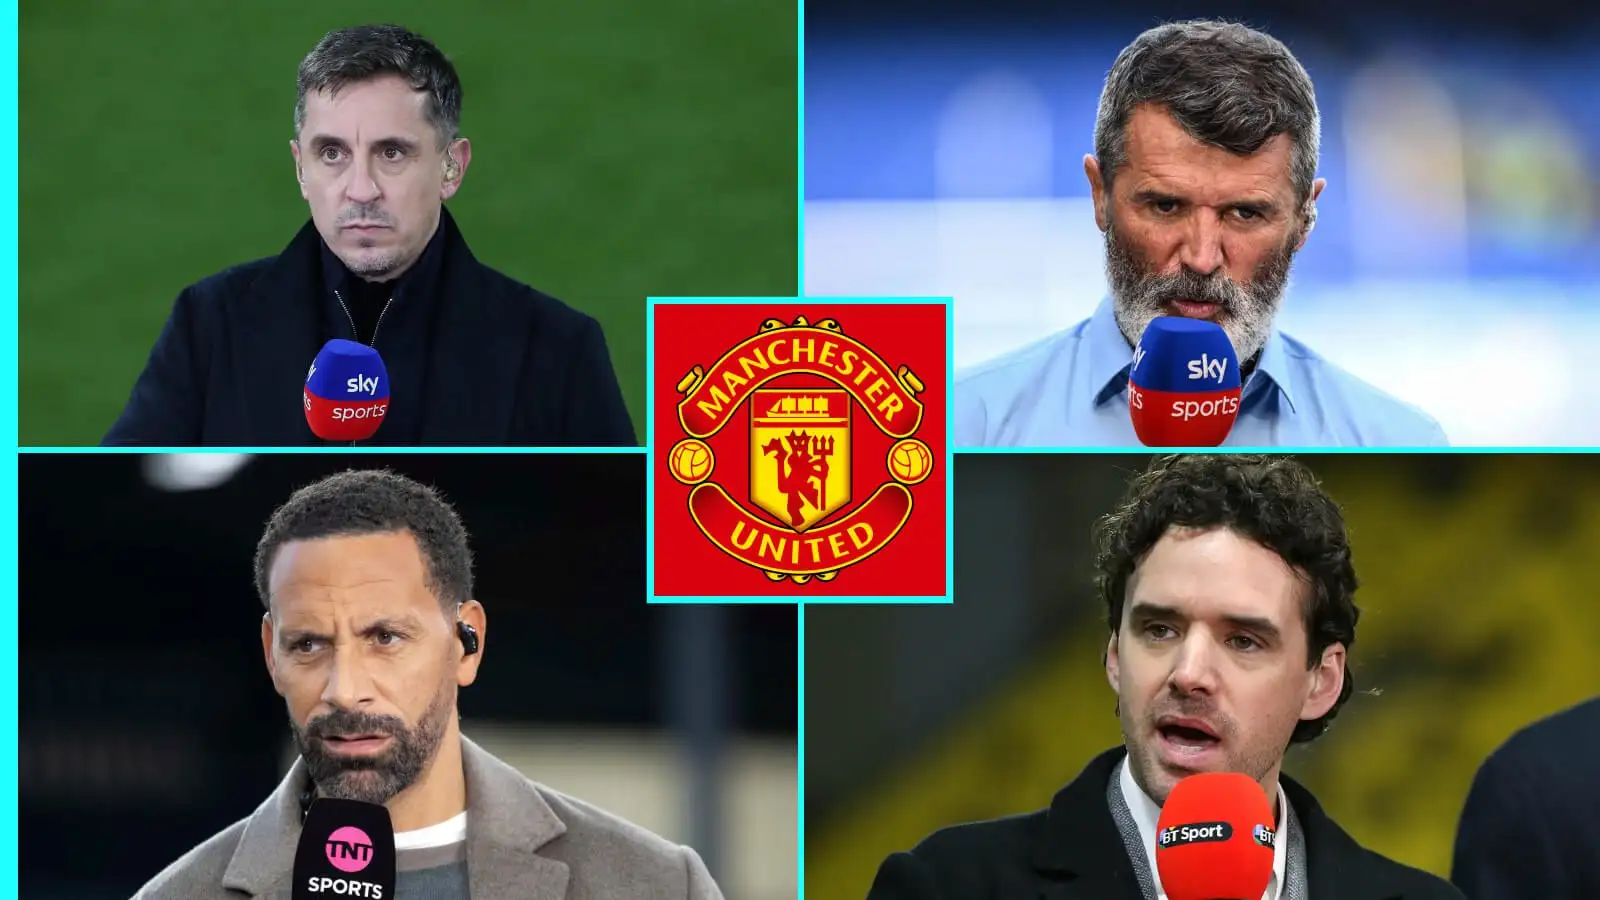 Previous Individual Utd players Gary Neville, Roy Keane, Rio Ferdinand and Owen Hargreaves.